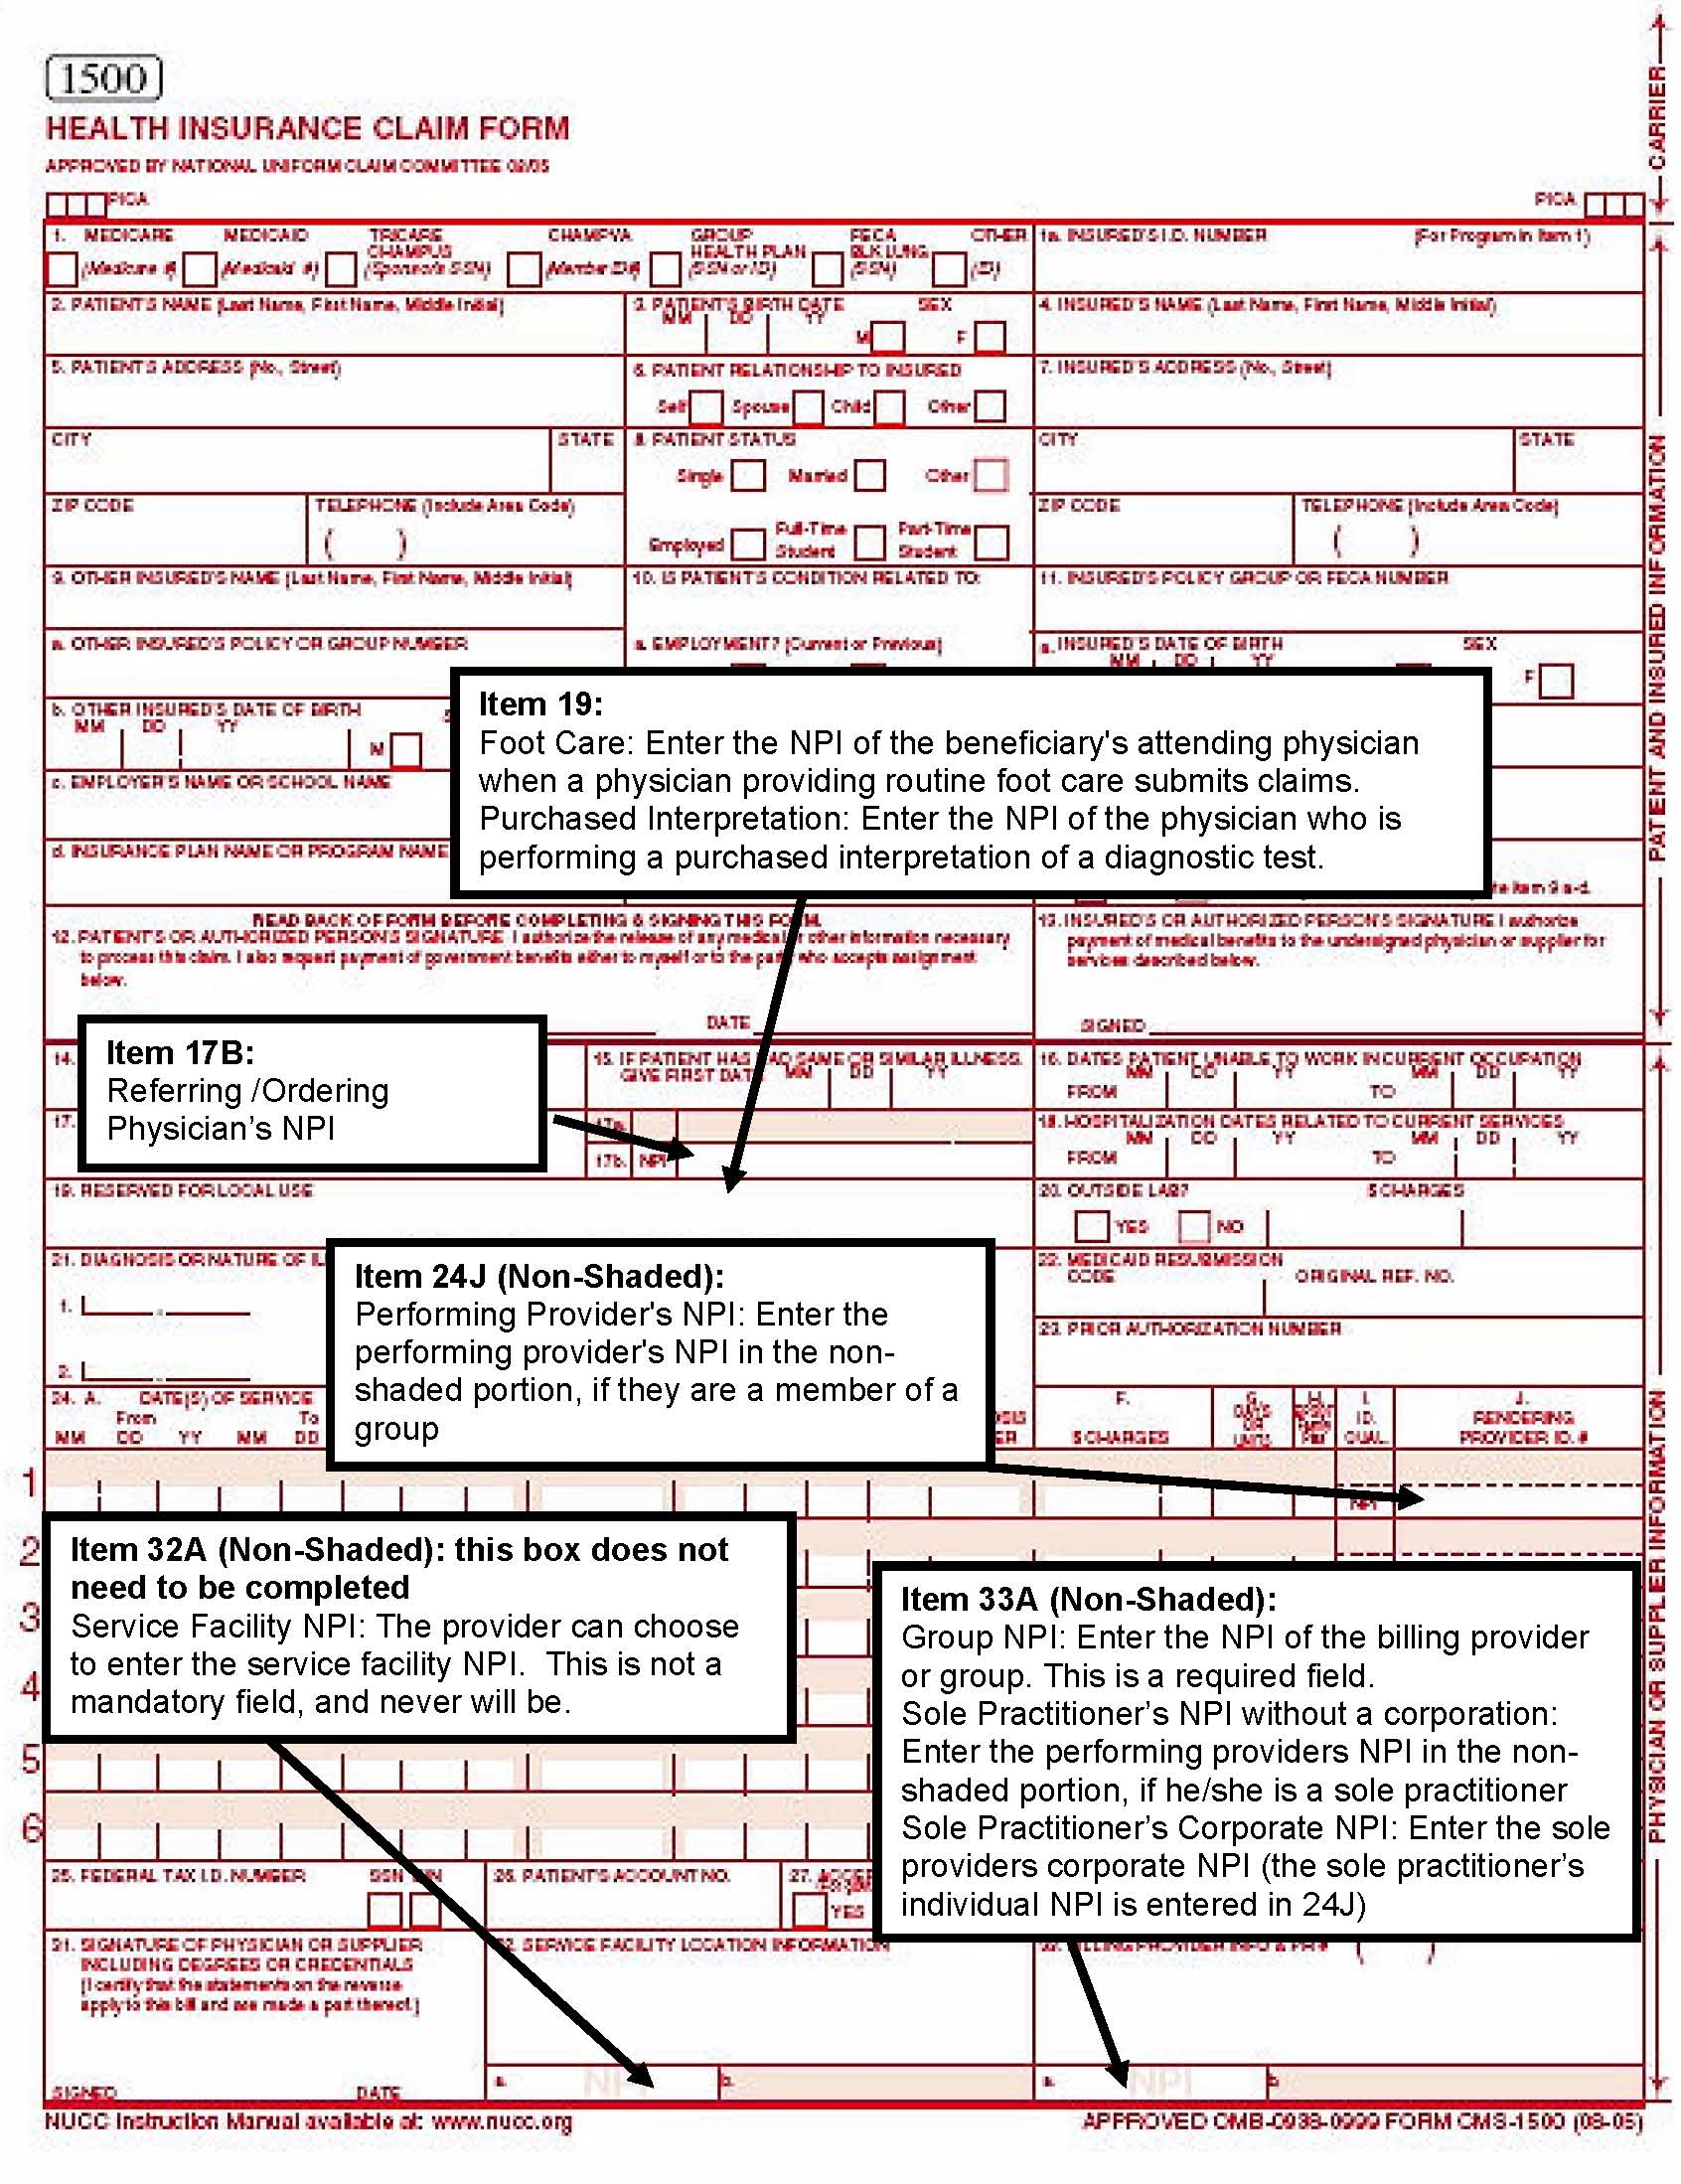 printable-cms-1500-form-02-12-printable-forms-free-online